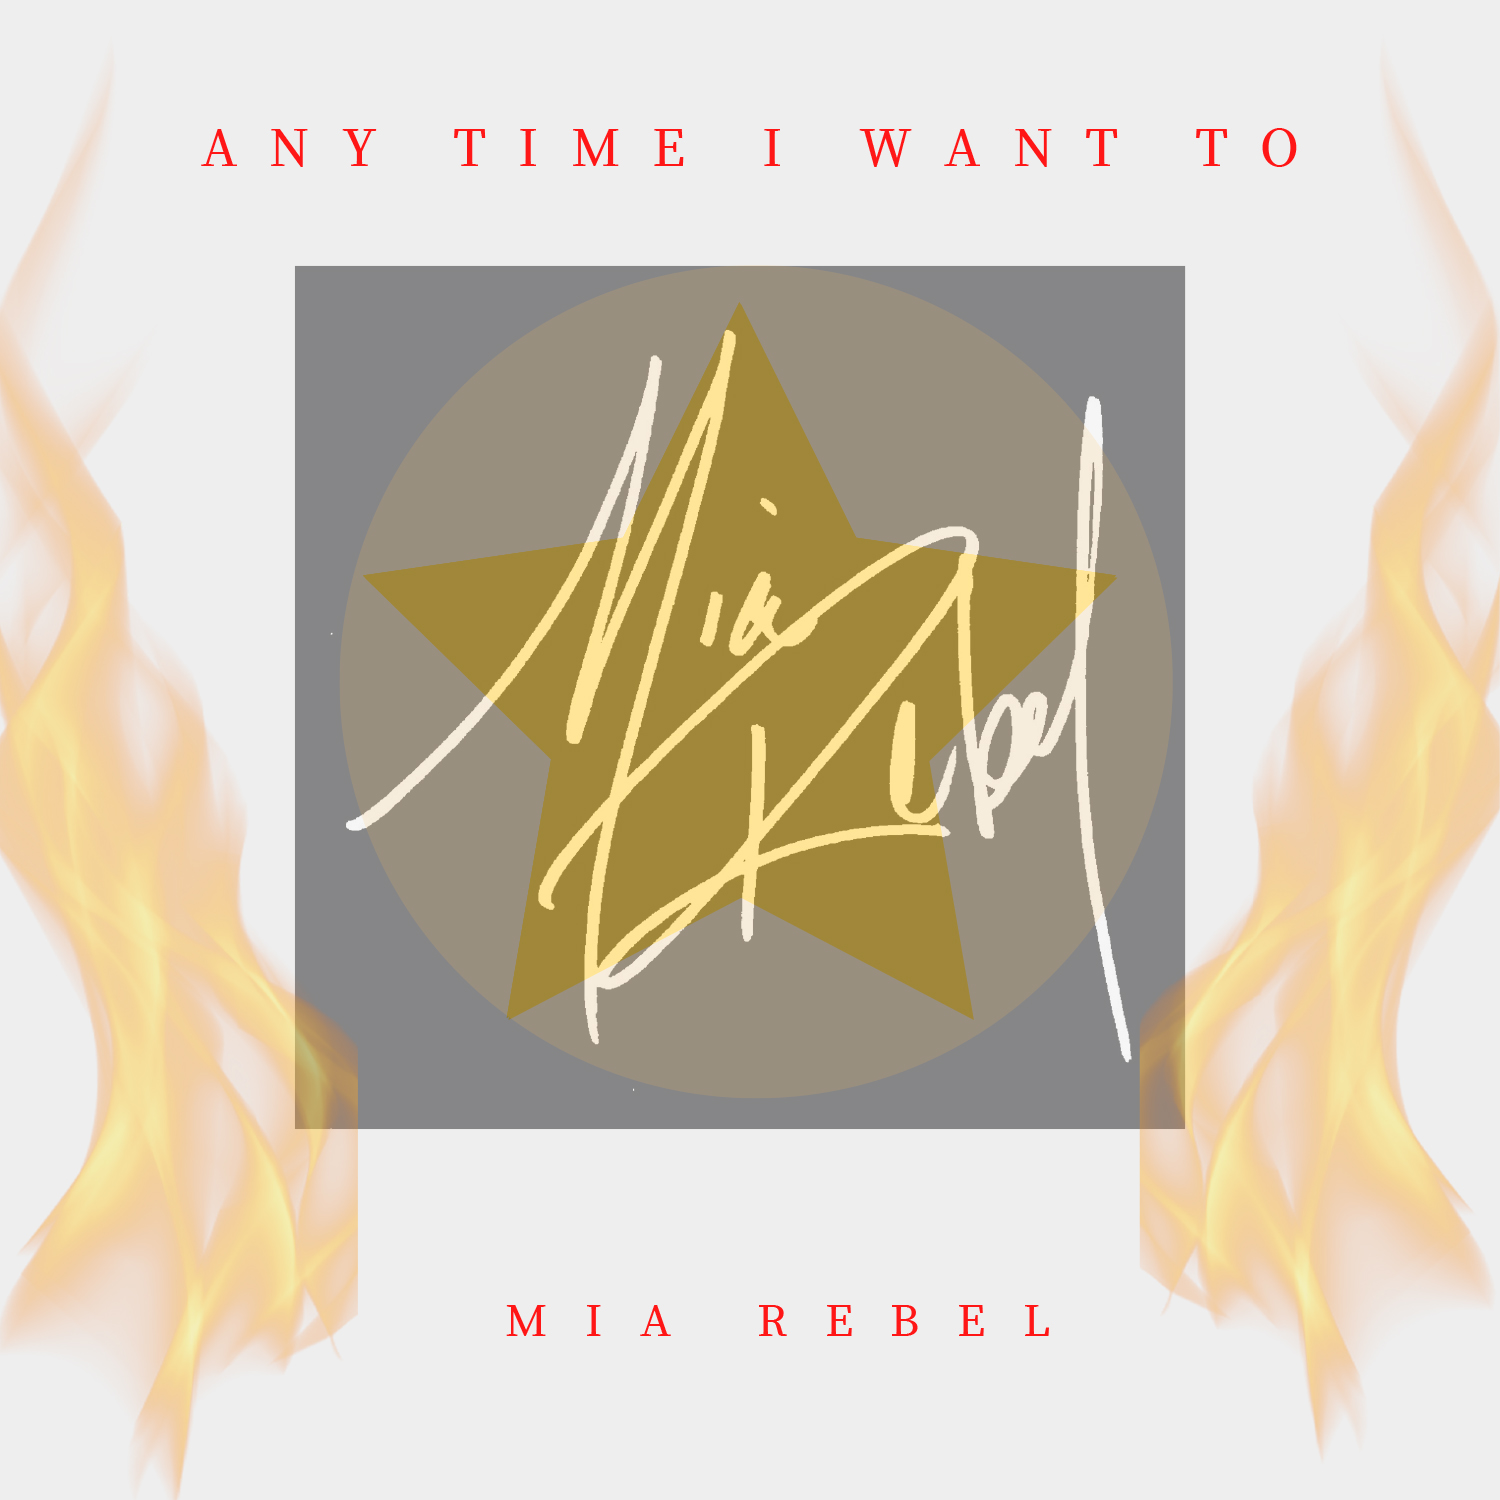 Anytime I want to by Mia Rebel